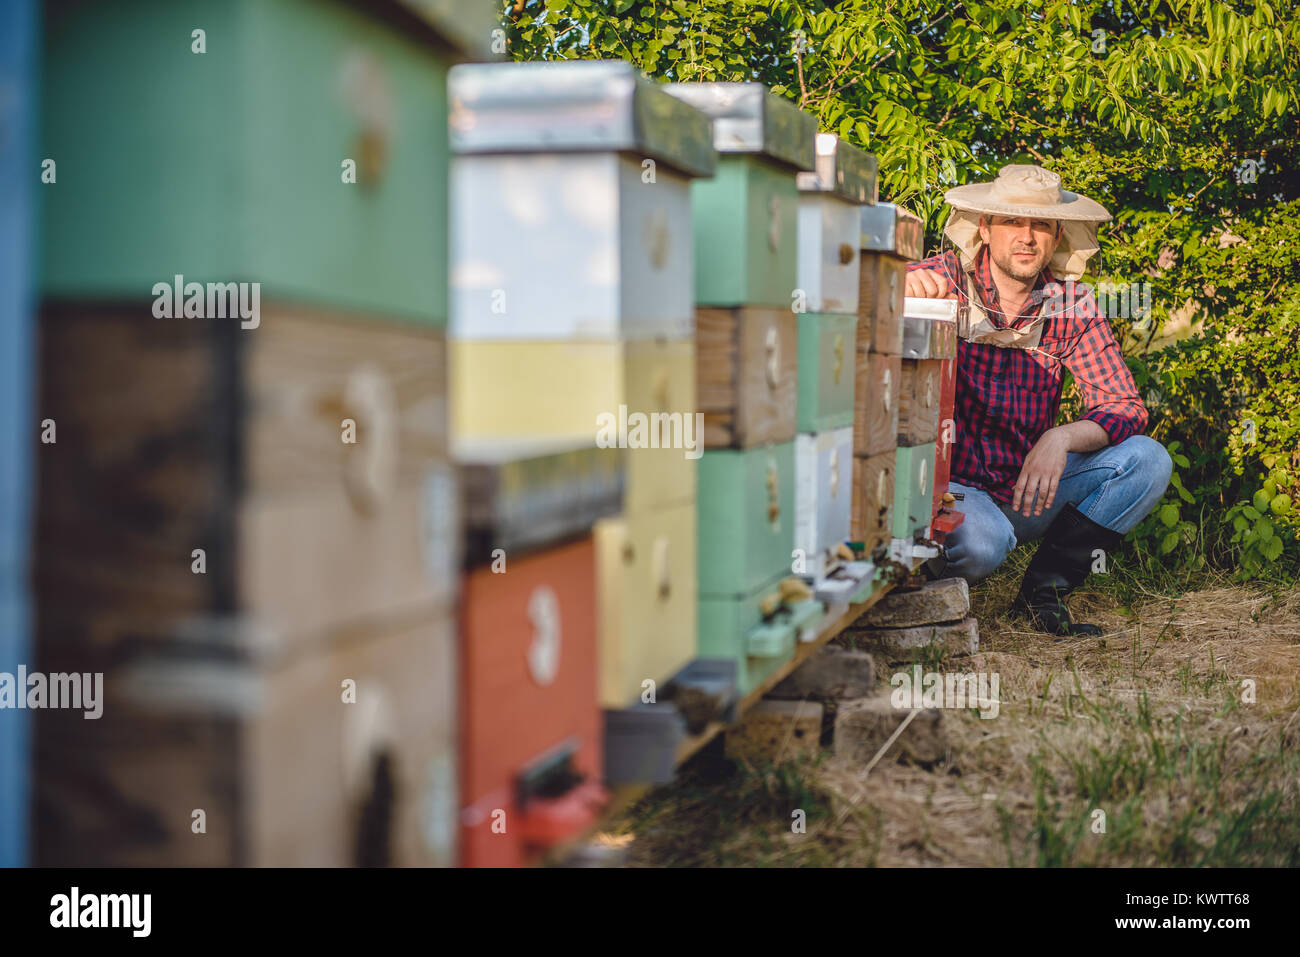 Beekeeper wearing protective hat posing next to his beehives Stock Photo